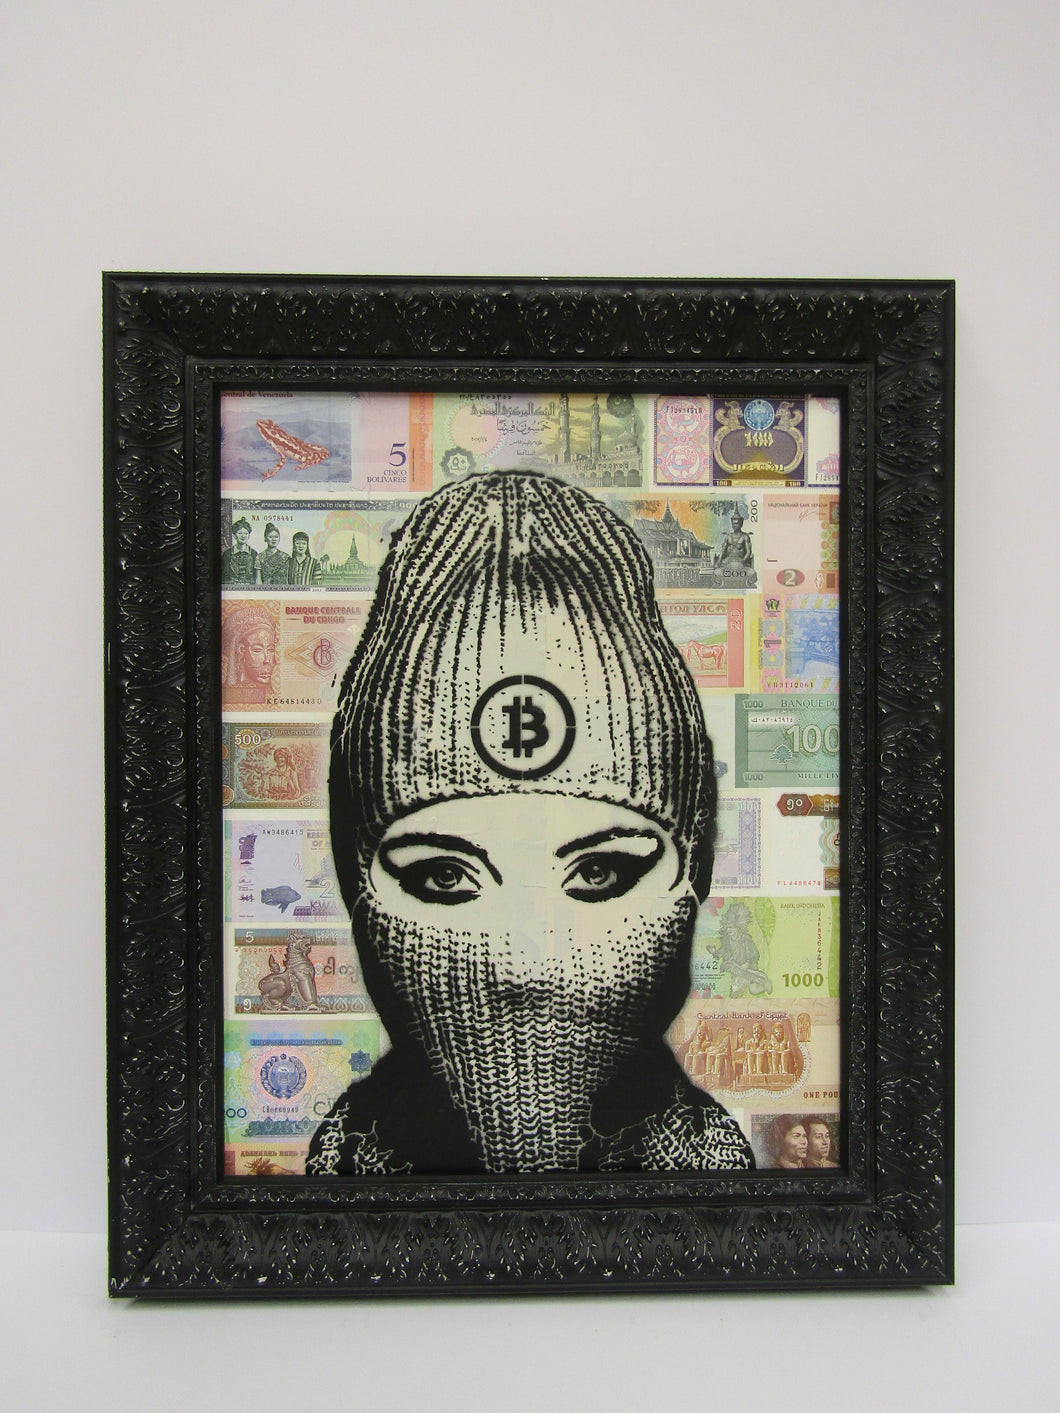 bitcoin over banknotes - 7 of 10